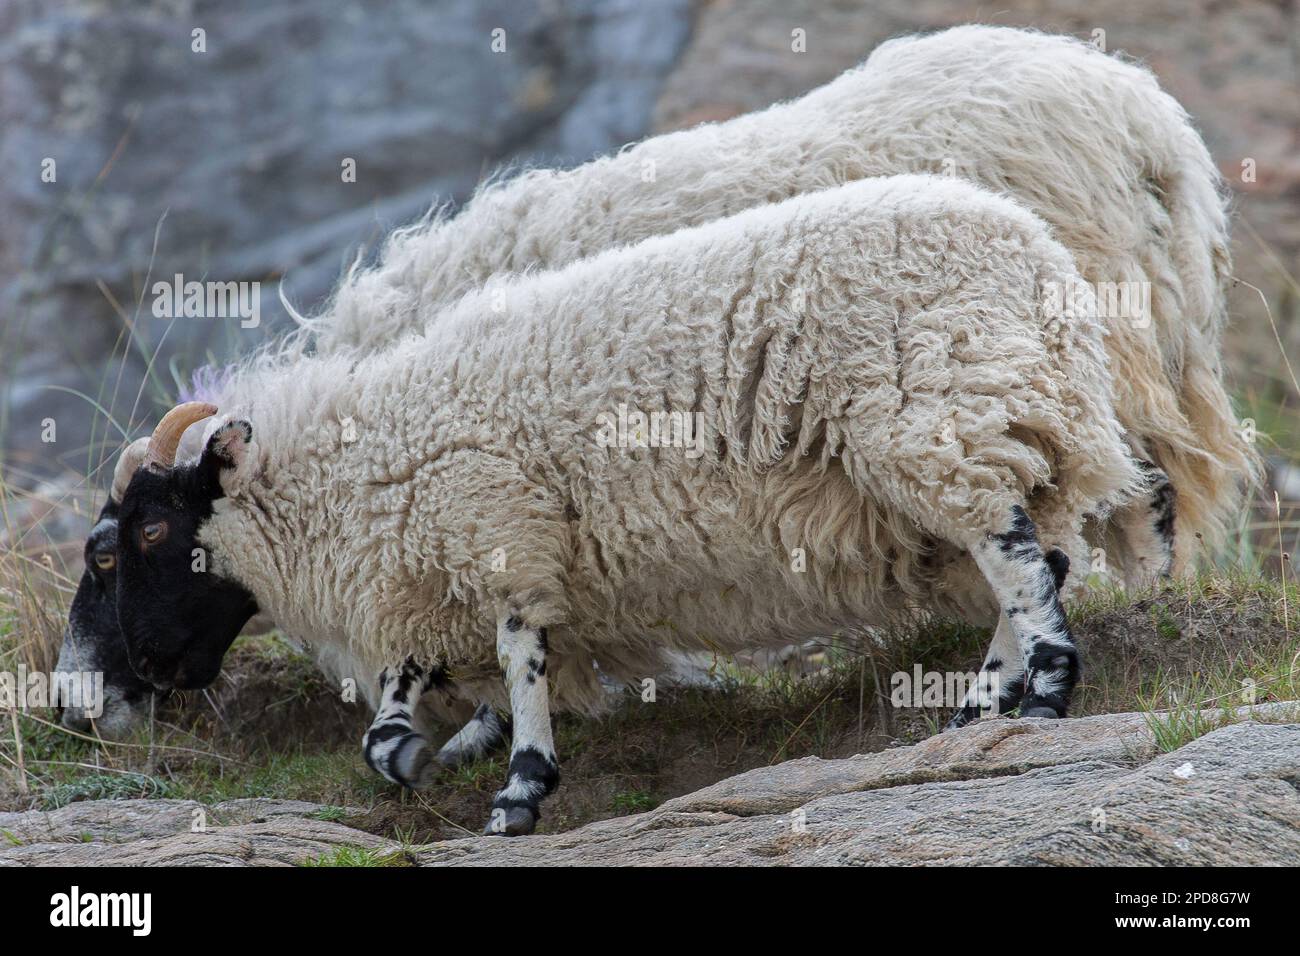 Pair of Sheep standing close together,One behind the Other, Lewis, Isle of Lewis, Hebrides, Outer Hebrides, Western Isles, Scotland, United Kingdom Stock Photo